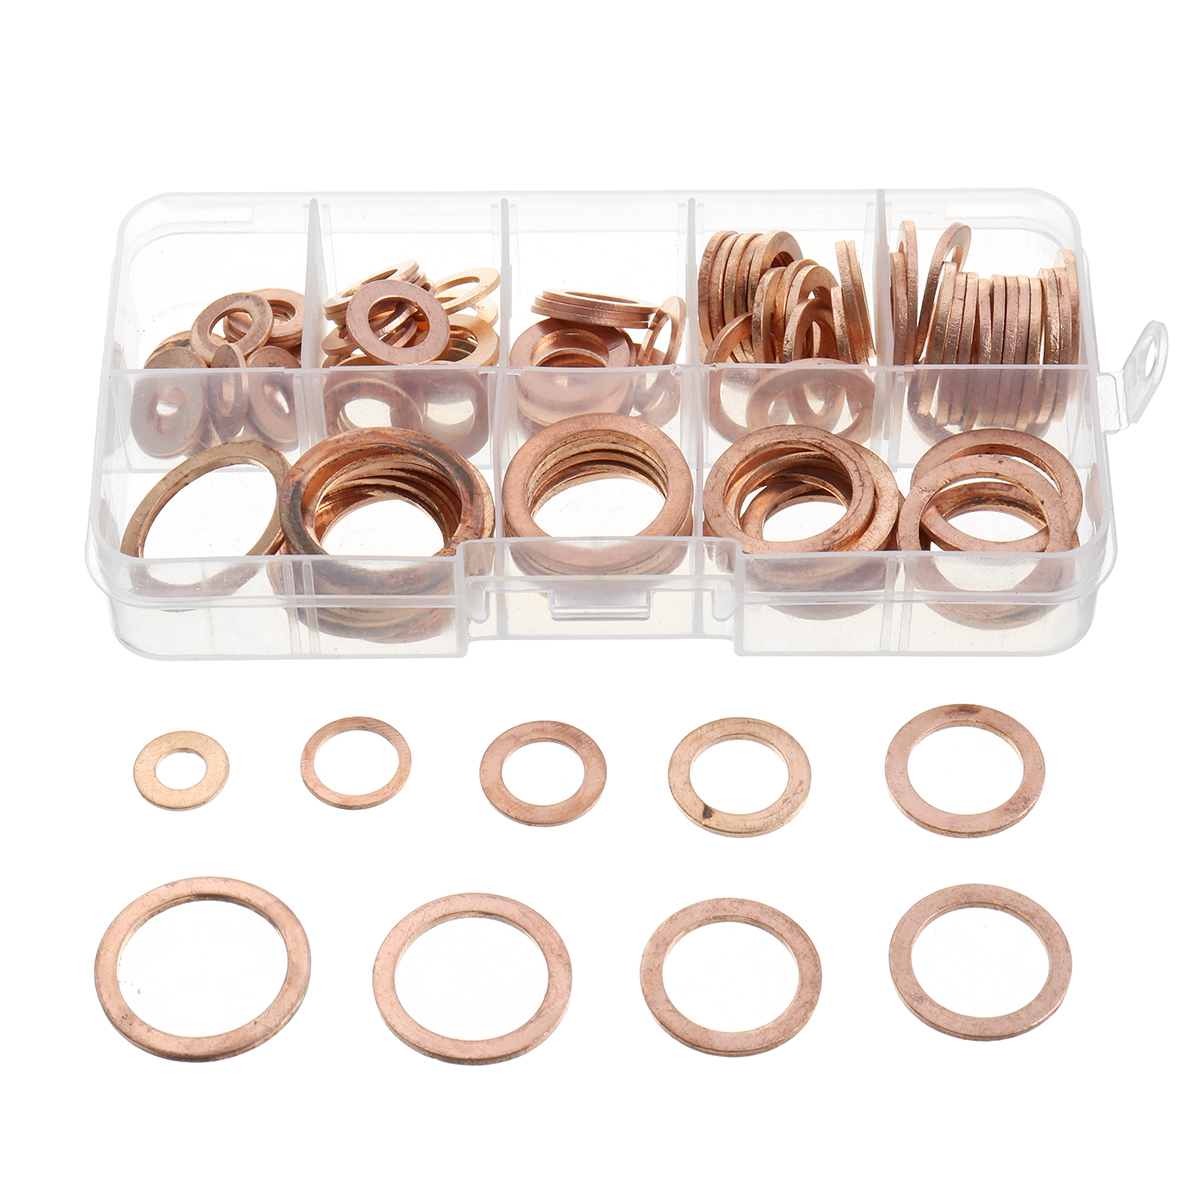 100Pcs-Assorted-Copper-Sealing-Solid-Gasket-Washer-Sump-Plug-Oil-For-Boat-Crush-Flat-Seal-Ring-Tool--1809755-3